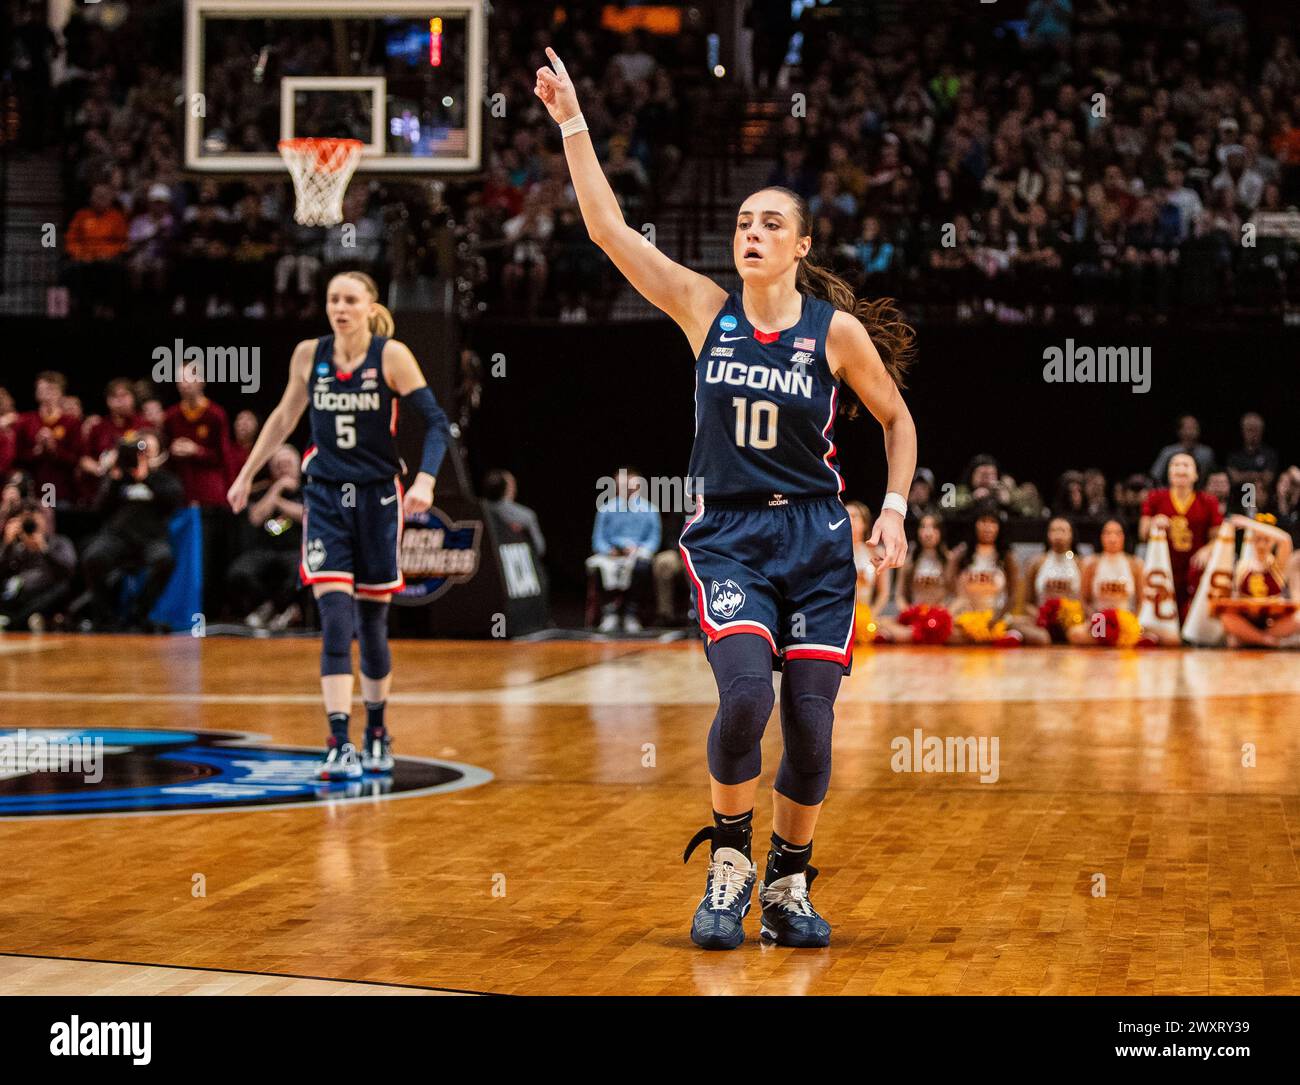 Portland, OR U.S. 01st Apr, 2024. A. UConn guard Nika Muhl (10)reacts after hitting a 3 point shot during the NCAA Women's Basketball Regional Elite 8 game 2 between USC Trojans and the UConn Huskies. UConn beat USC 80-73 to advance to the final four. Moda Center Portland, OR. Thurman James/CSM/Alamy Live News Stock Photo